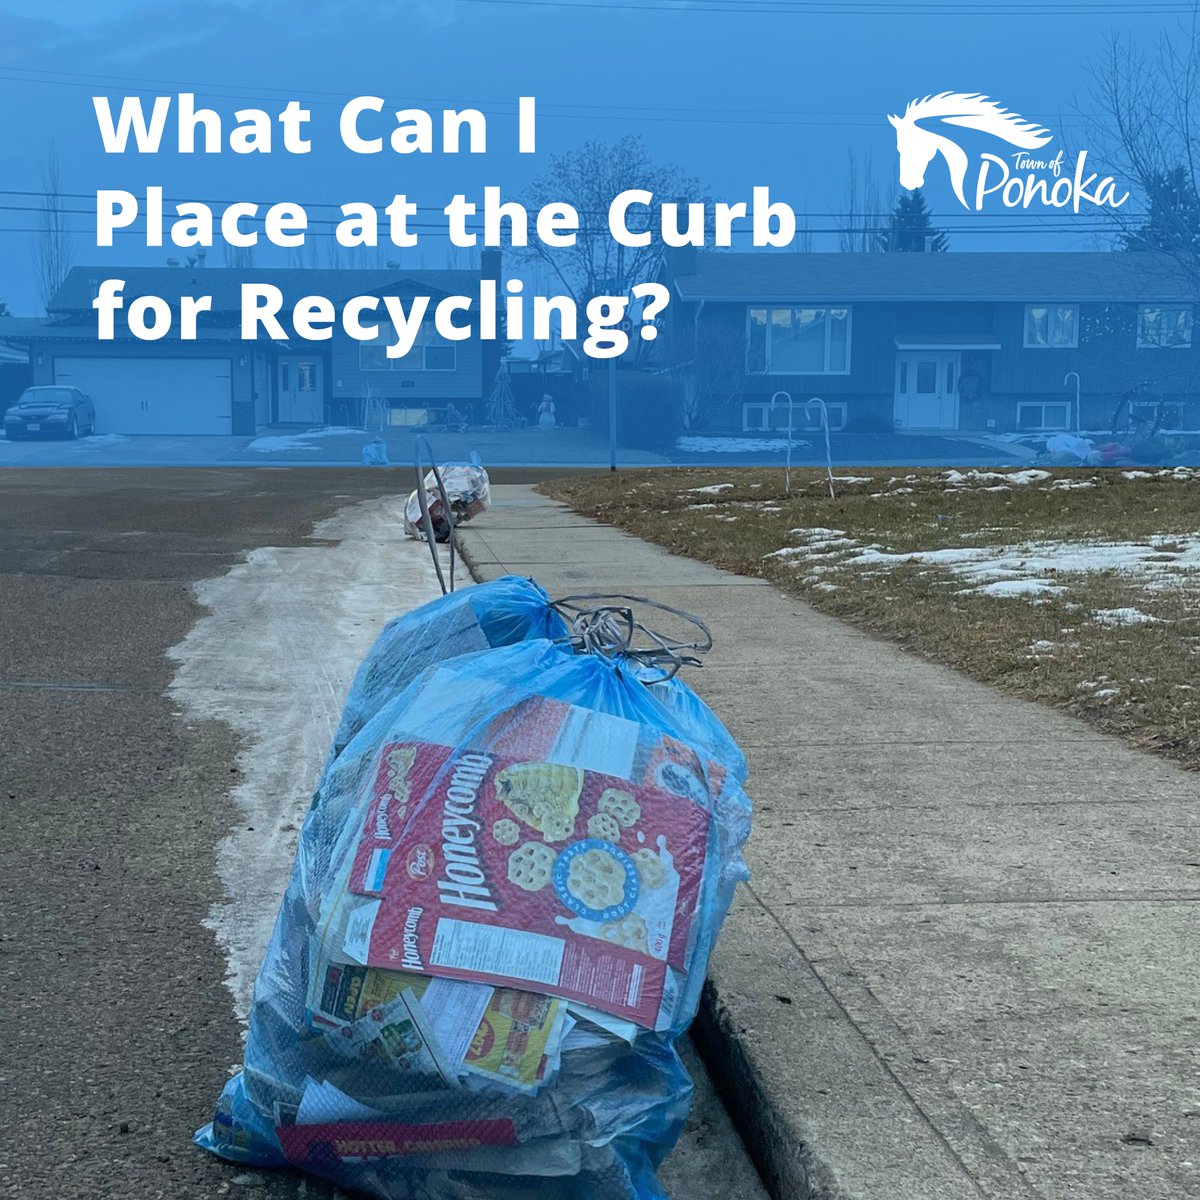 What Can I Place at the Curb for Recycling? For a complete list of what items are ‘accepted’ and ‘not accepted’ in your recycling bag, please visit the Town of Ponoka’s website at ponoka.ca/p/recycling.